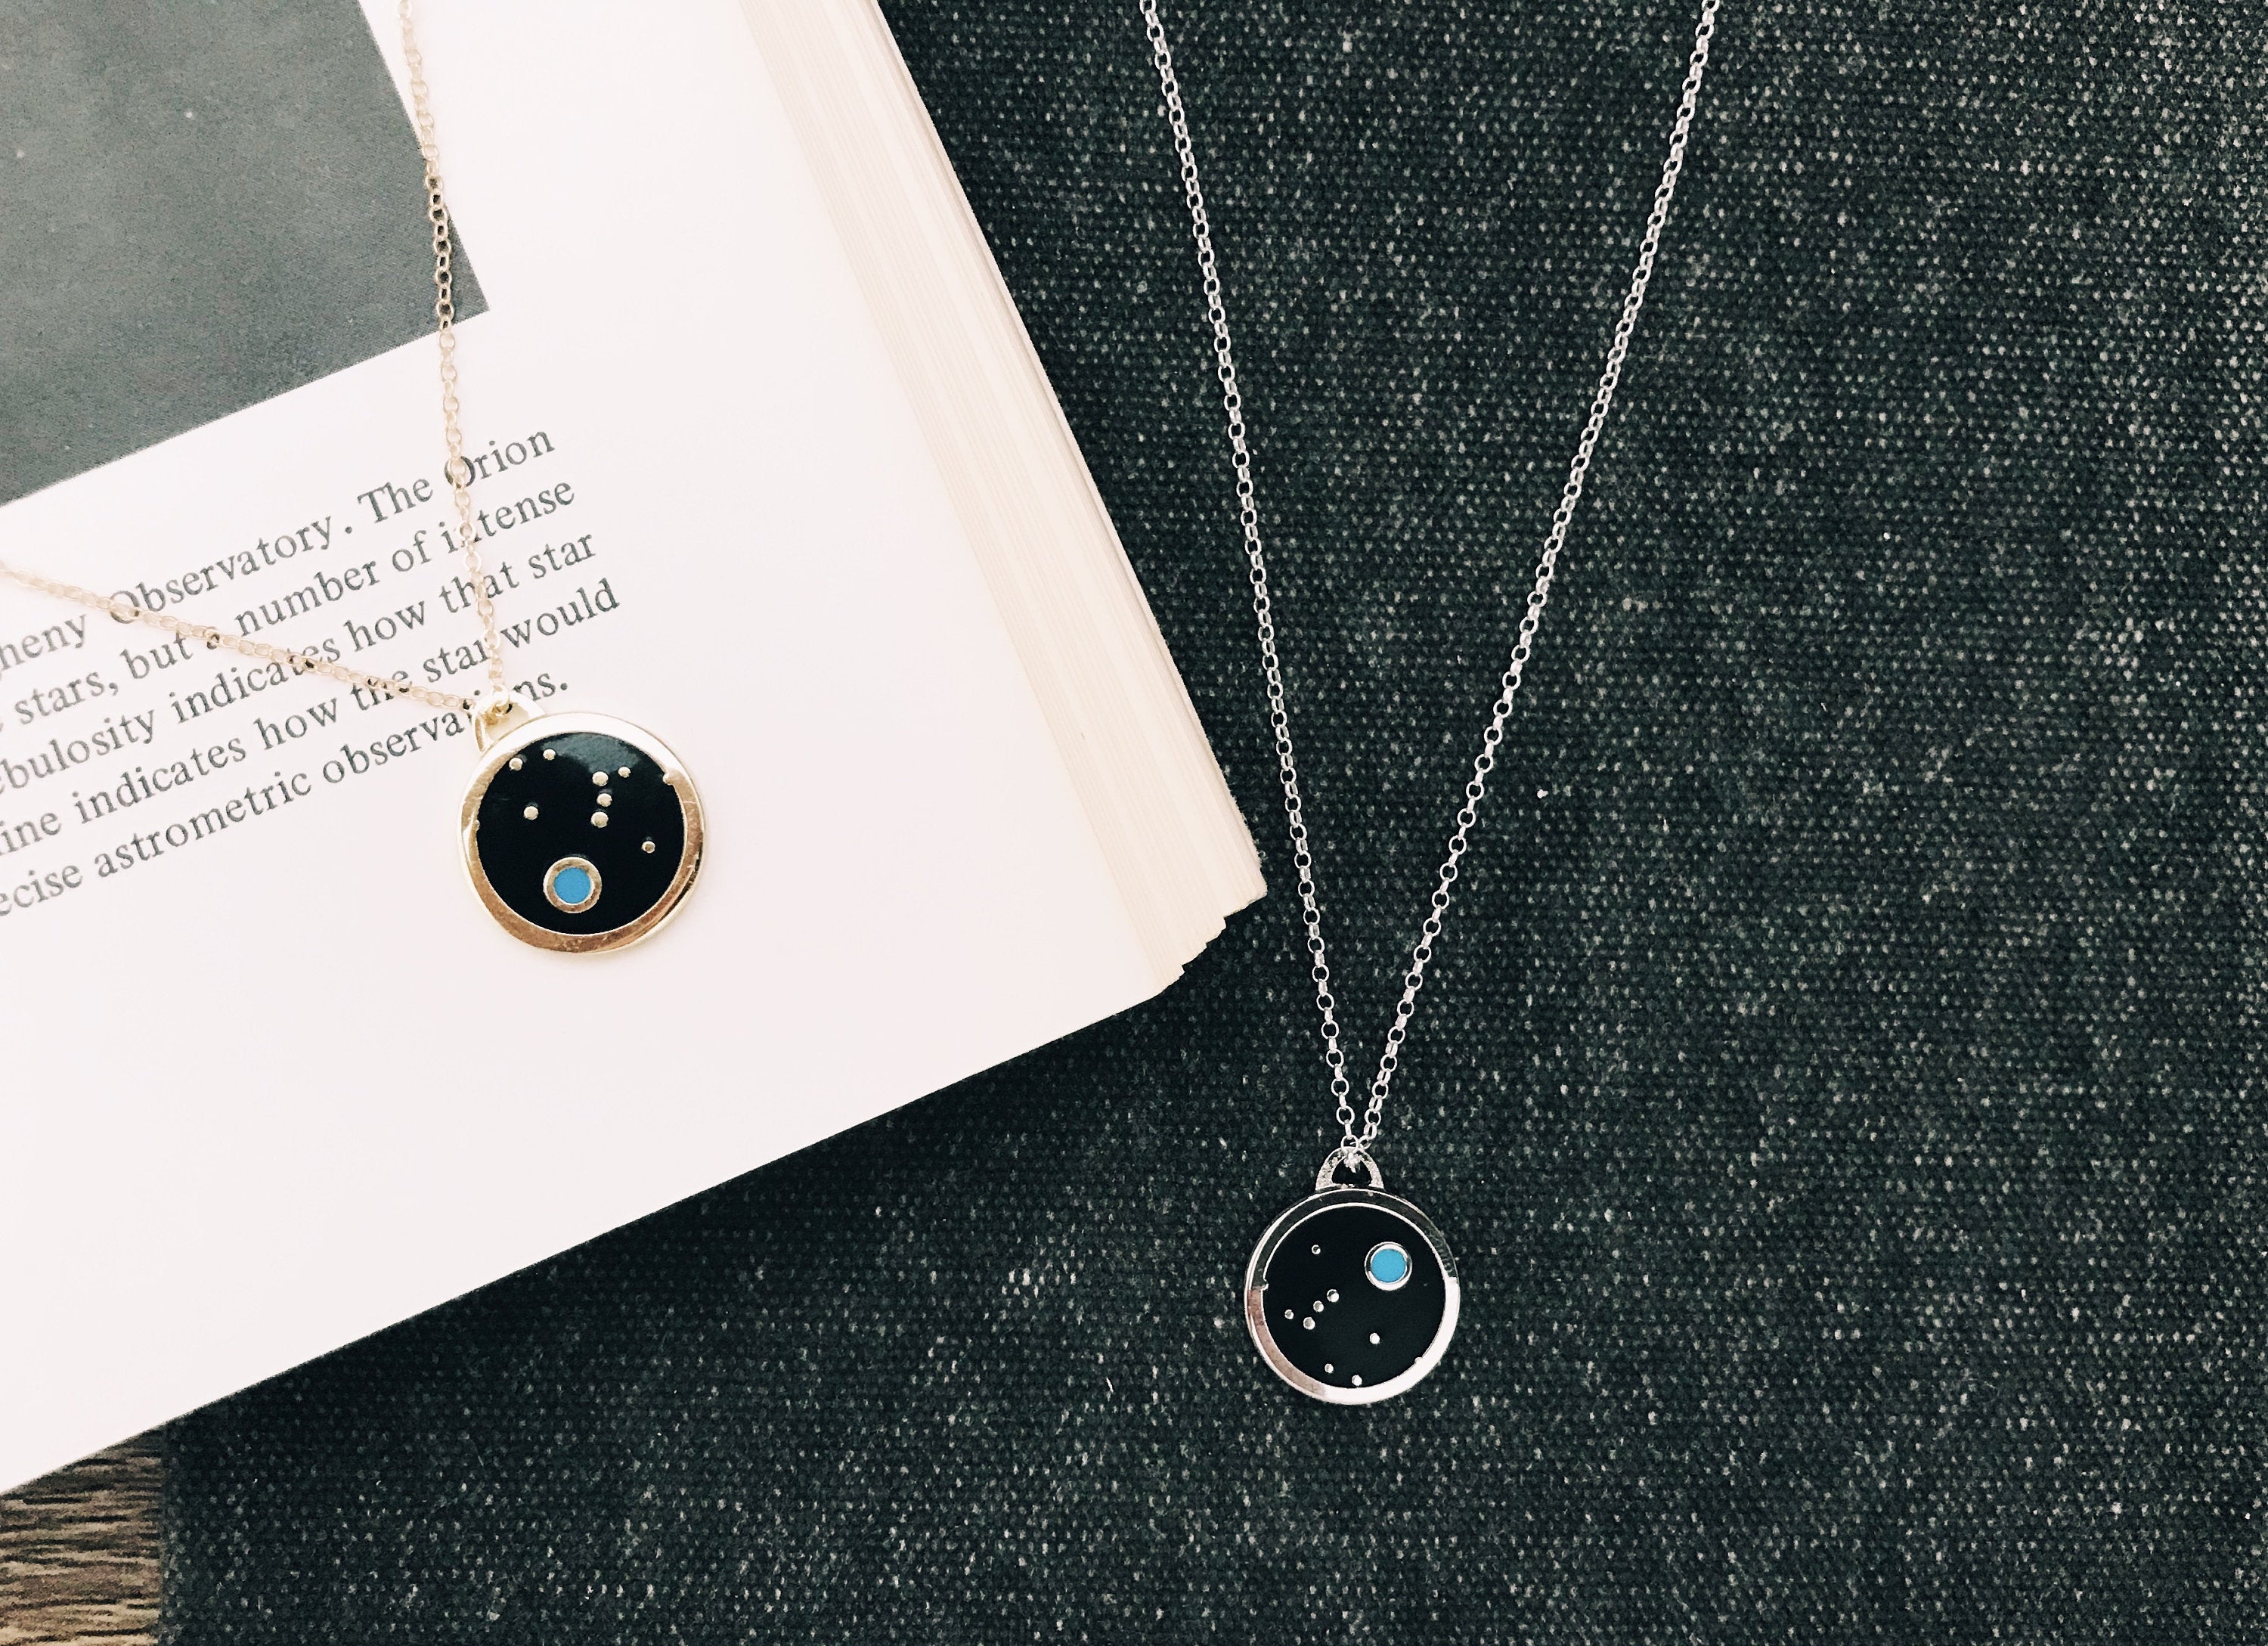 Pale Blue Dot Necklace - Astronomy / Space Pendant Necklace Gift - Celestial  / Earth Jewelry